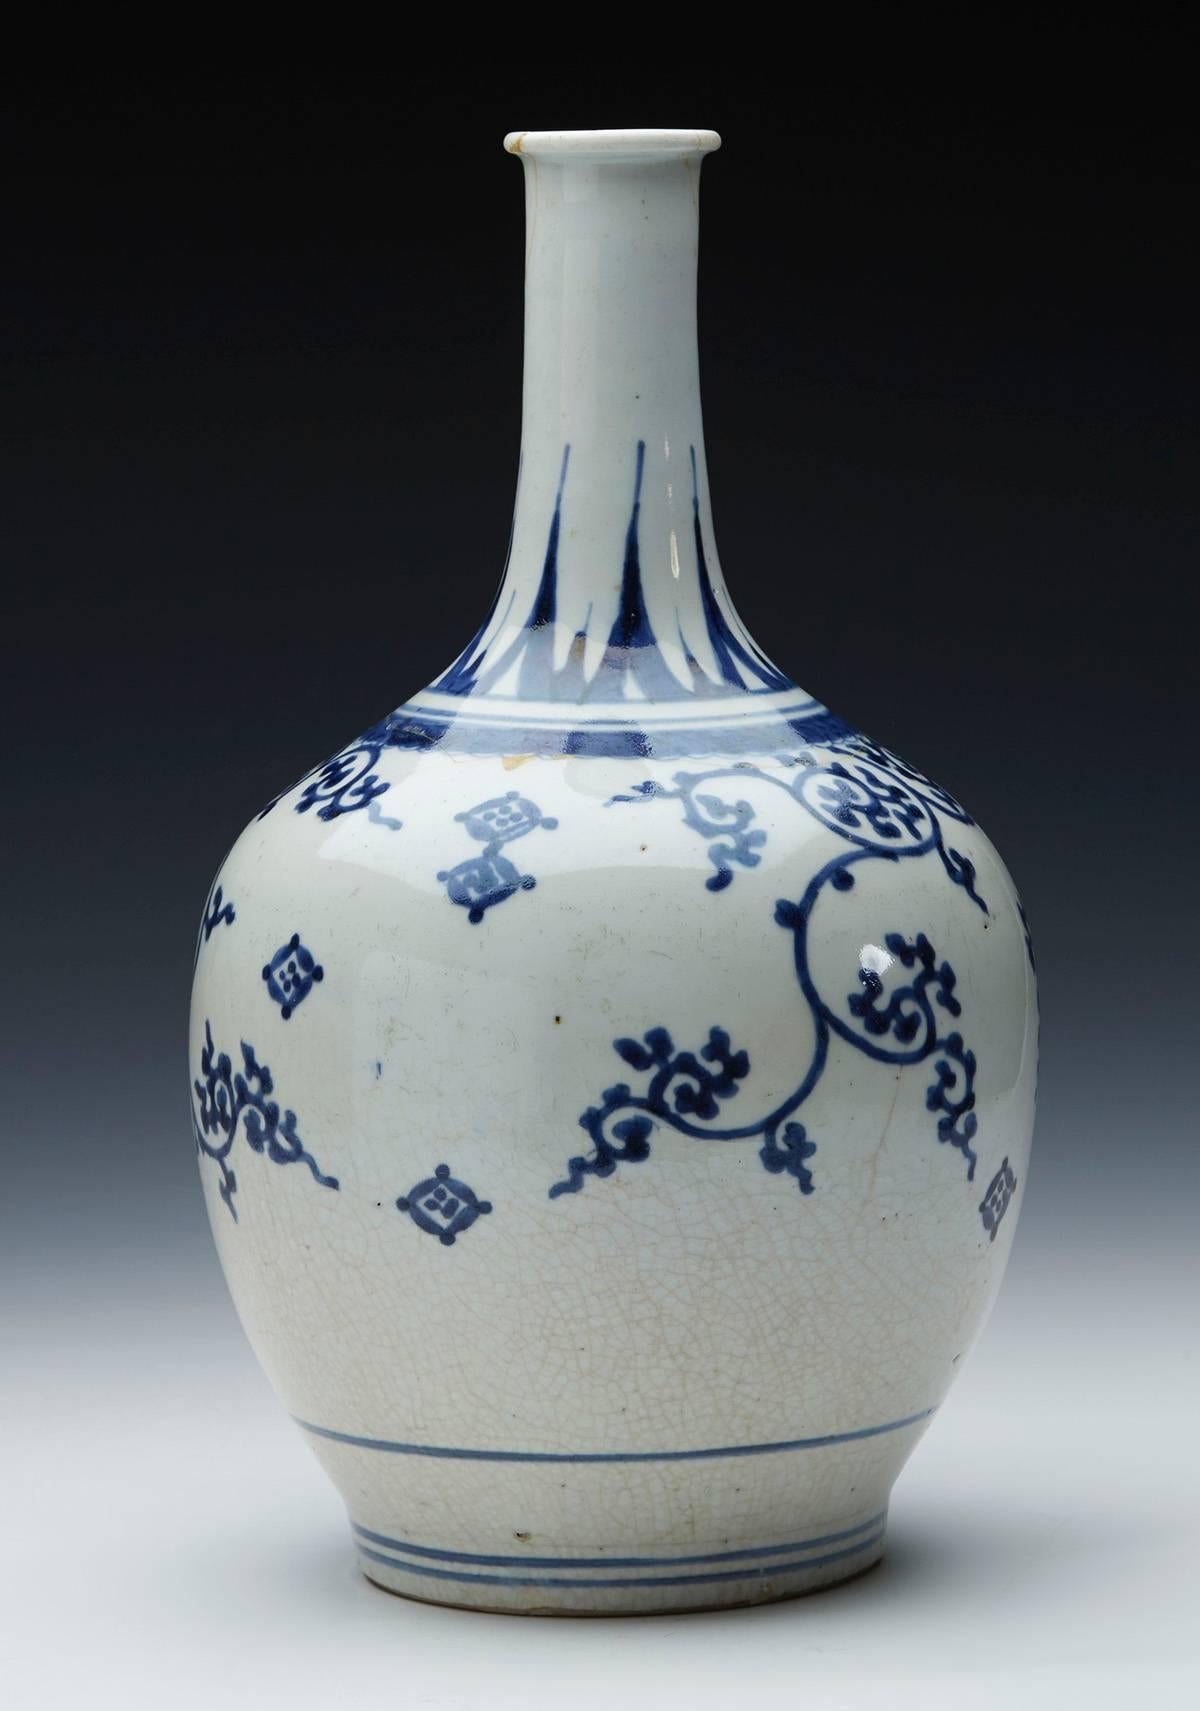 A rare antique Japanese Imari blue and white painted porcelain bottle shaped vase of large baluster shape standing on a narrow rounded unglazed foot. From a Japanese 17th century collection of similar examples all of which have been sold previously